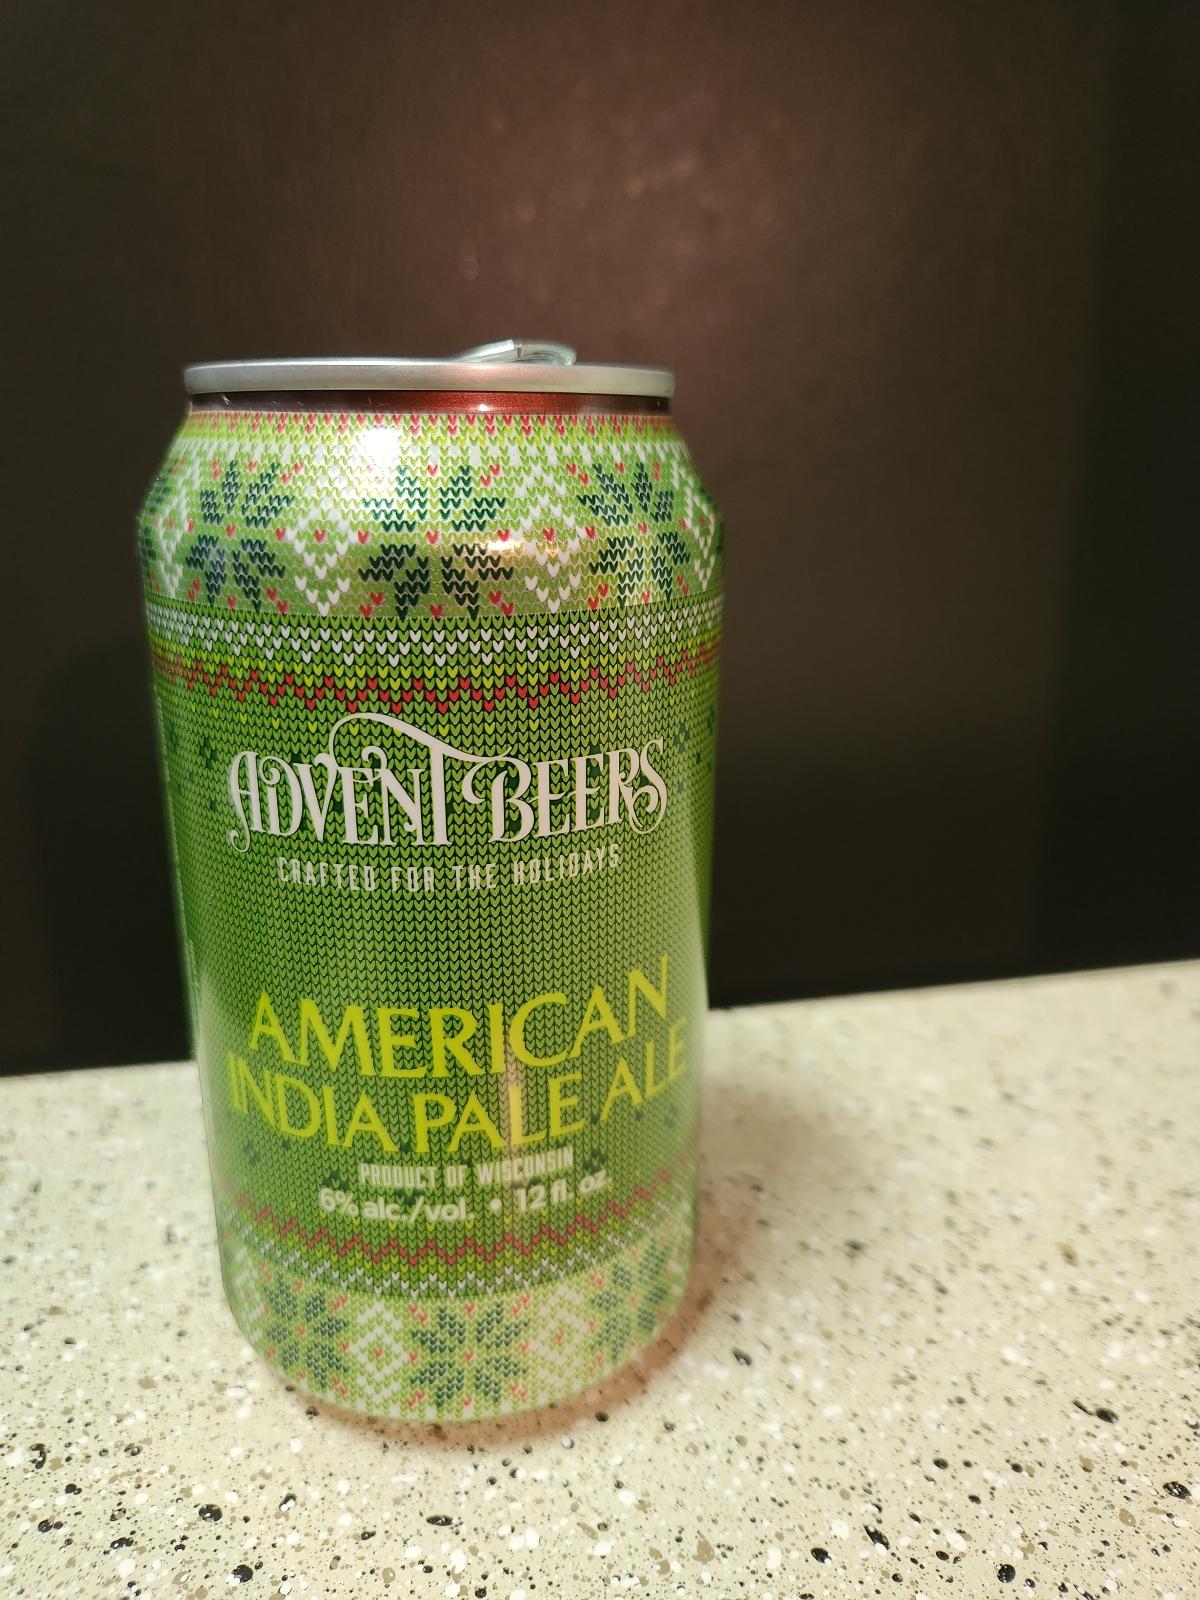 Advent Beers American India Pale Ale